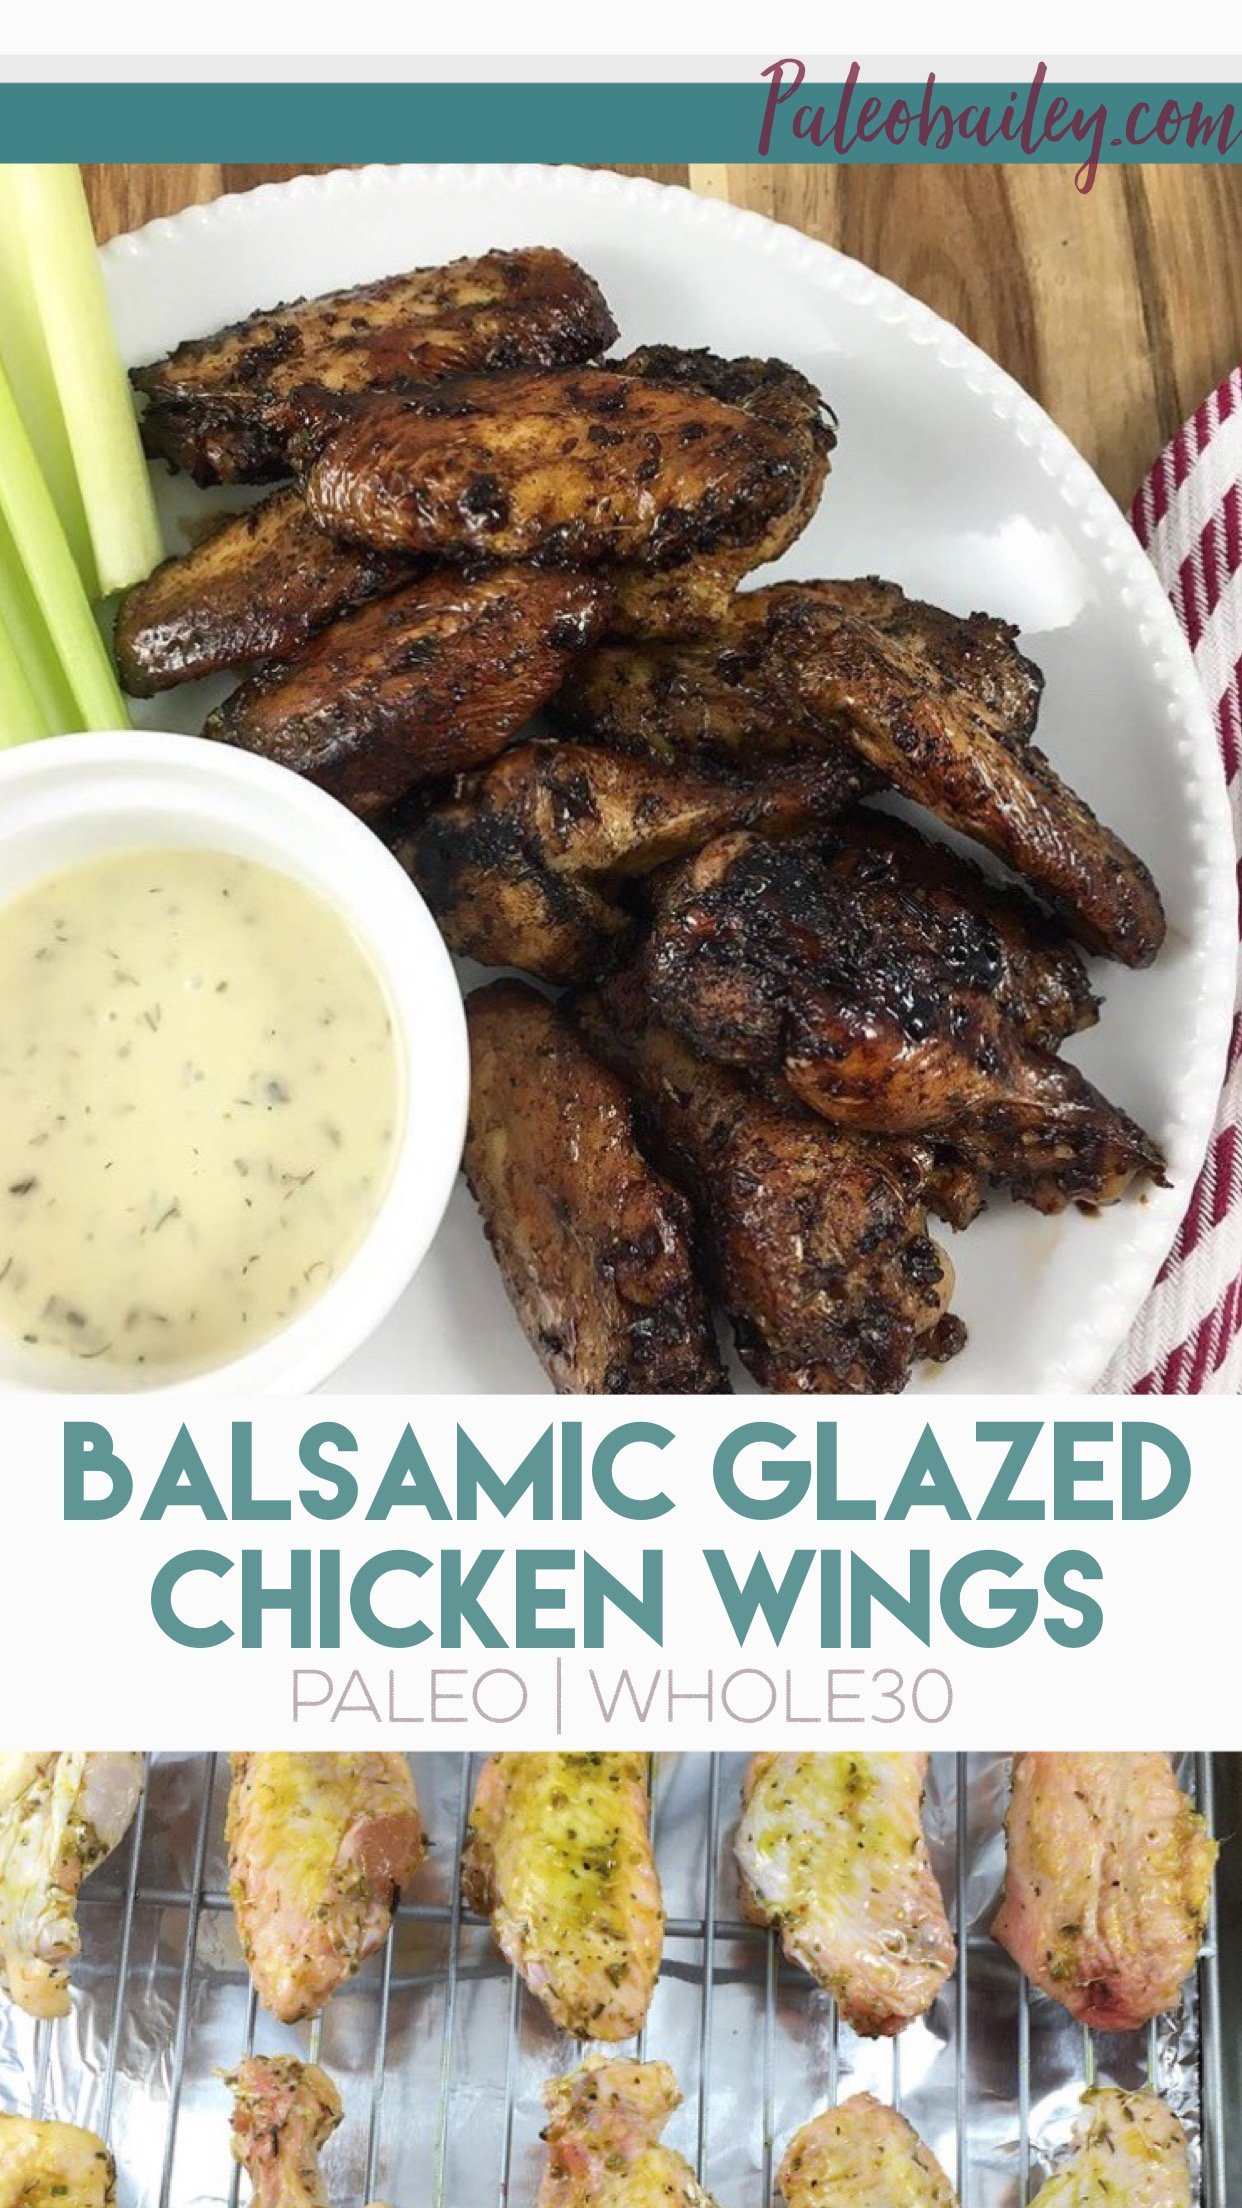 Whole30 and Paleo Balsamic glazed chicken wings with 6 ingredients you already have! #paleochickenwings #paleochicken #chickenwingrecipes